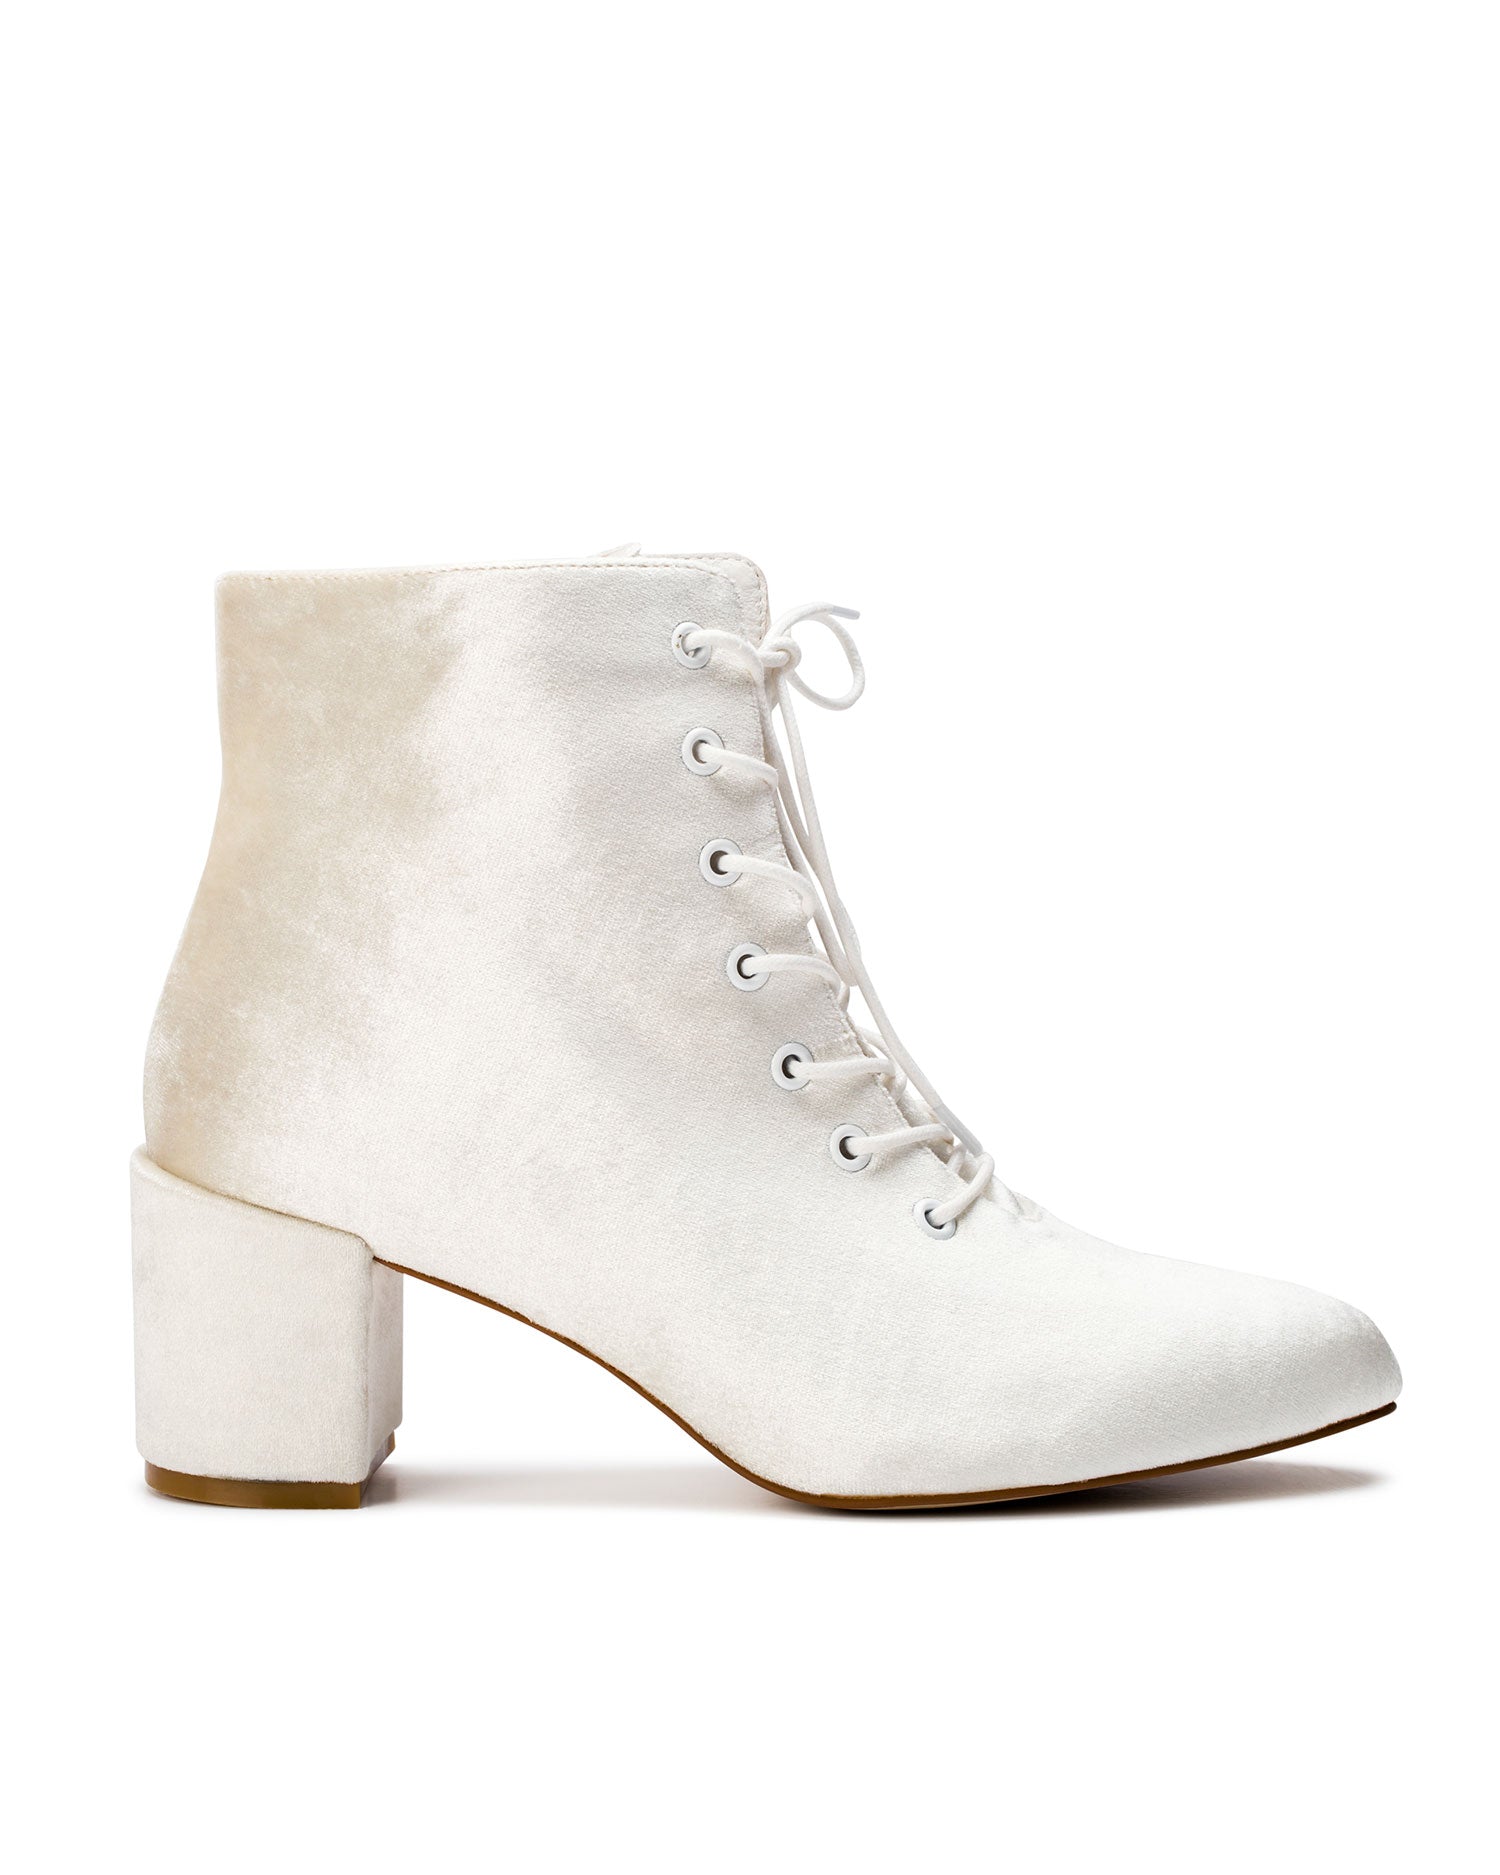 VOW - VELVET BRIDAL ANKLE BOOTIES